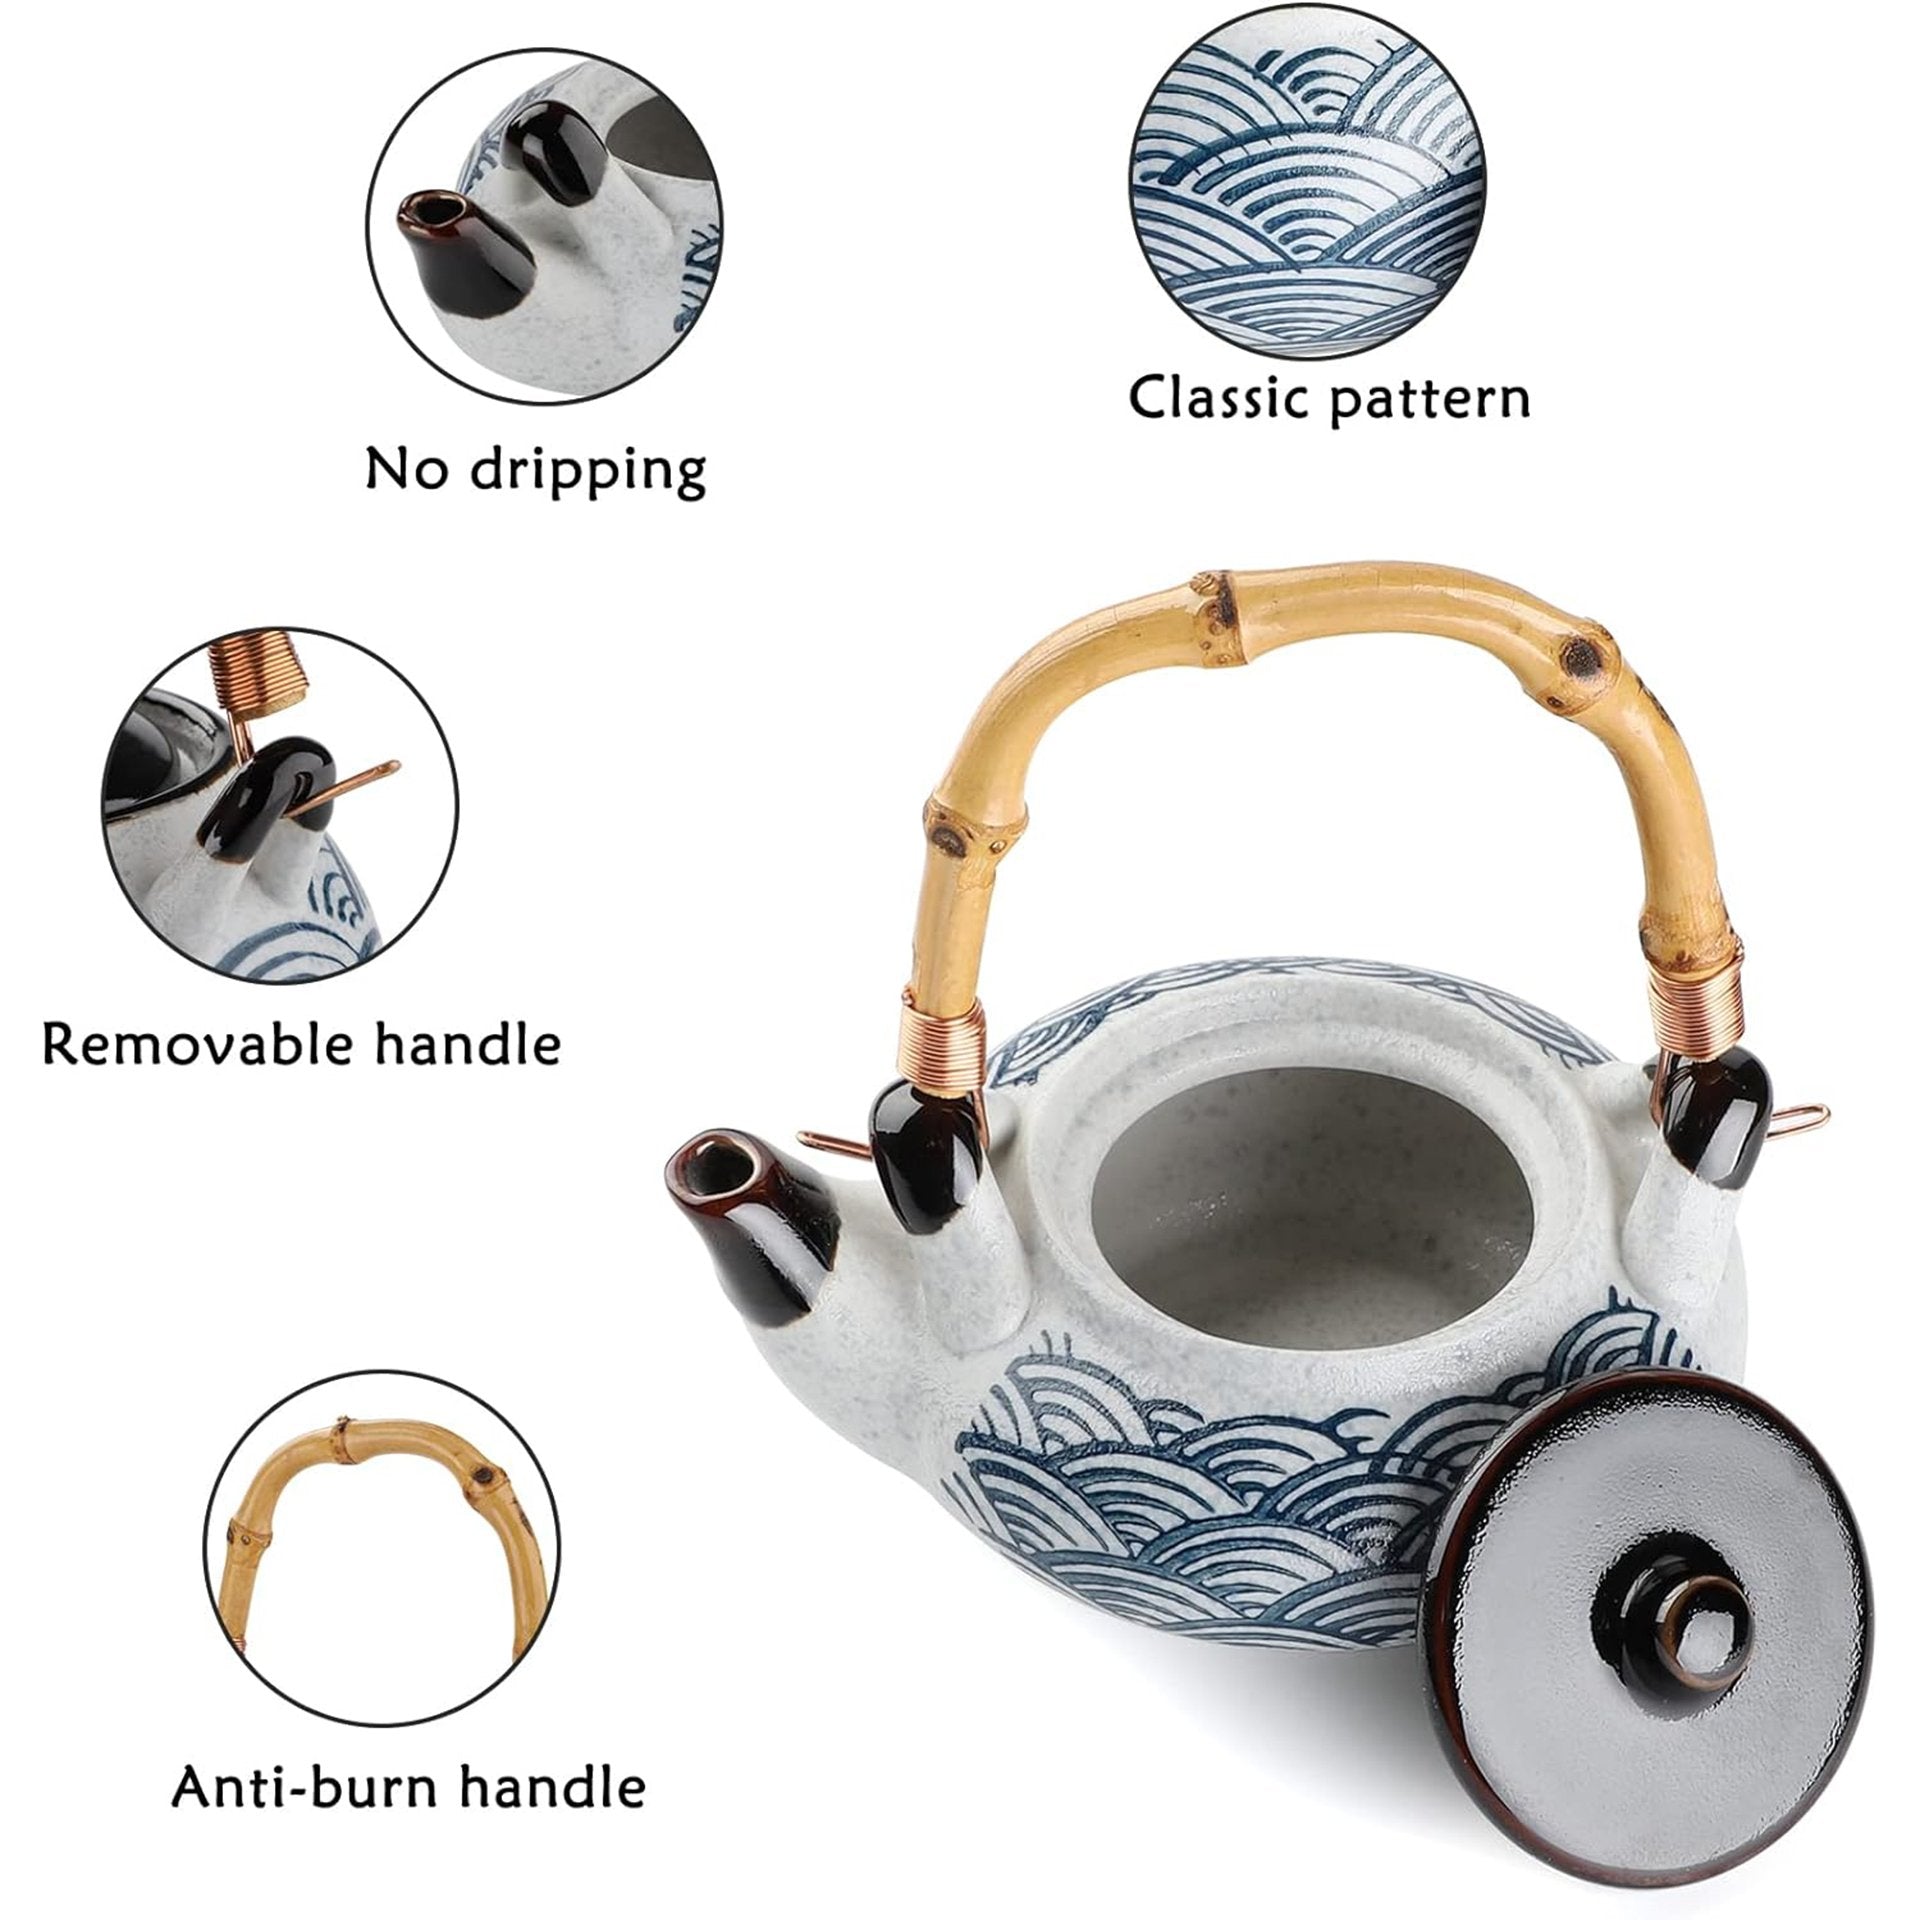 Features of a teapot showcased: no-drip spout, classic wave pattern, removable bamboo handle, and anti-burn design.